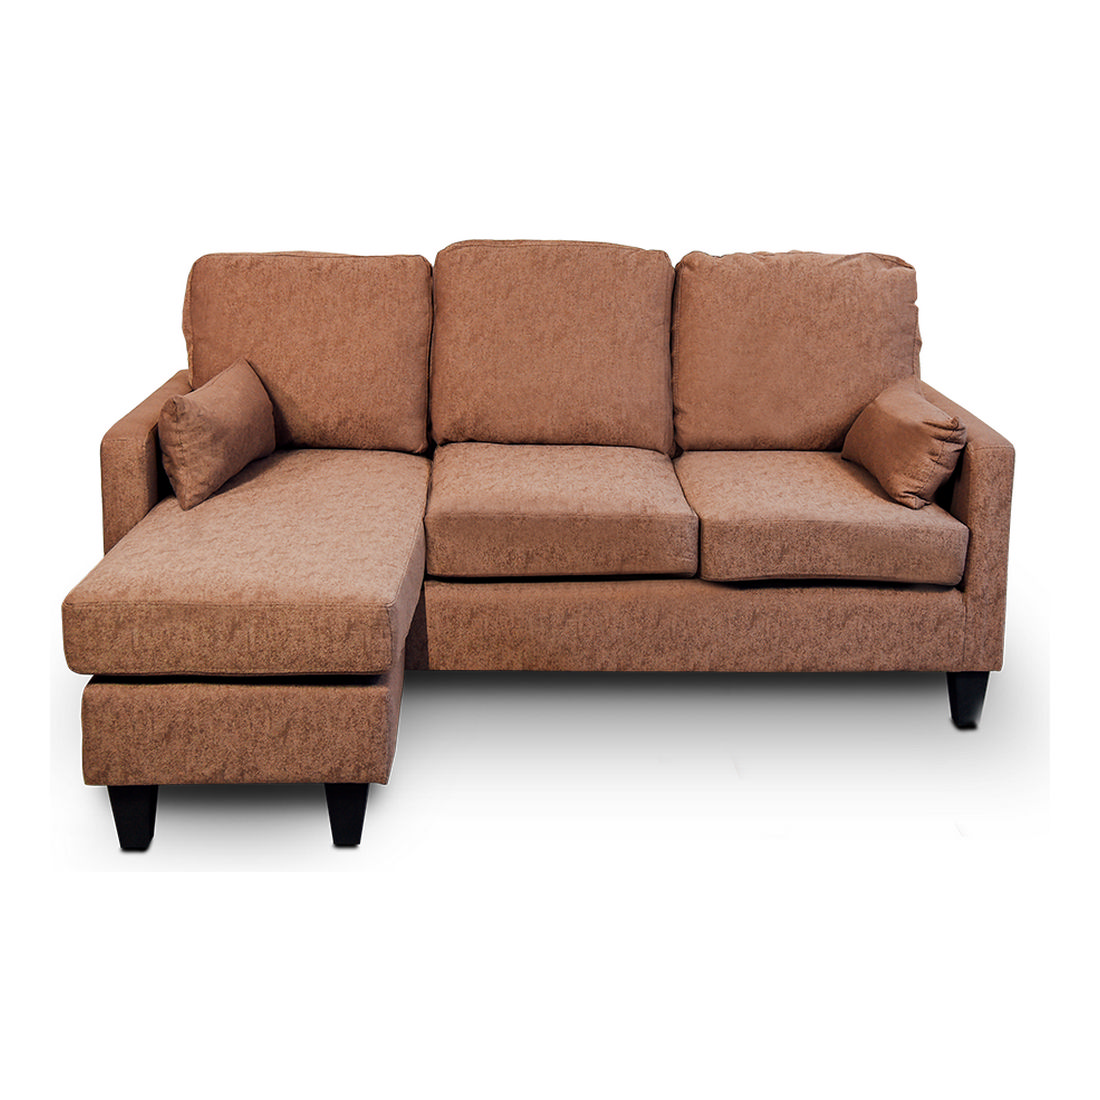 Sofabed Astan Hogar Chaise Lounge Chocolate